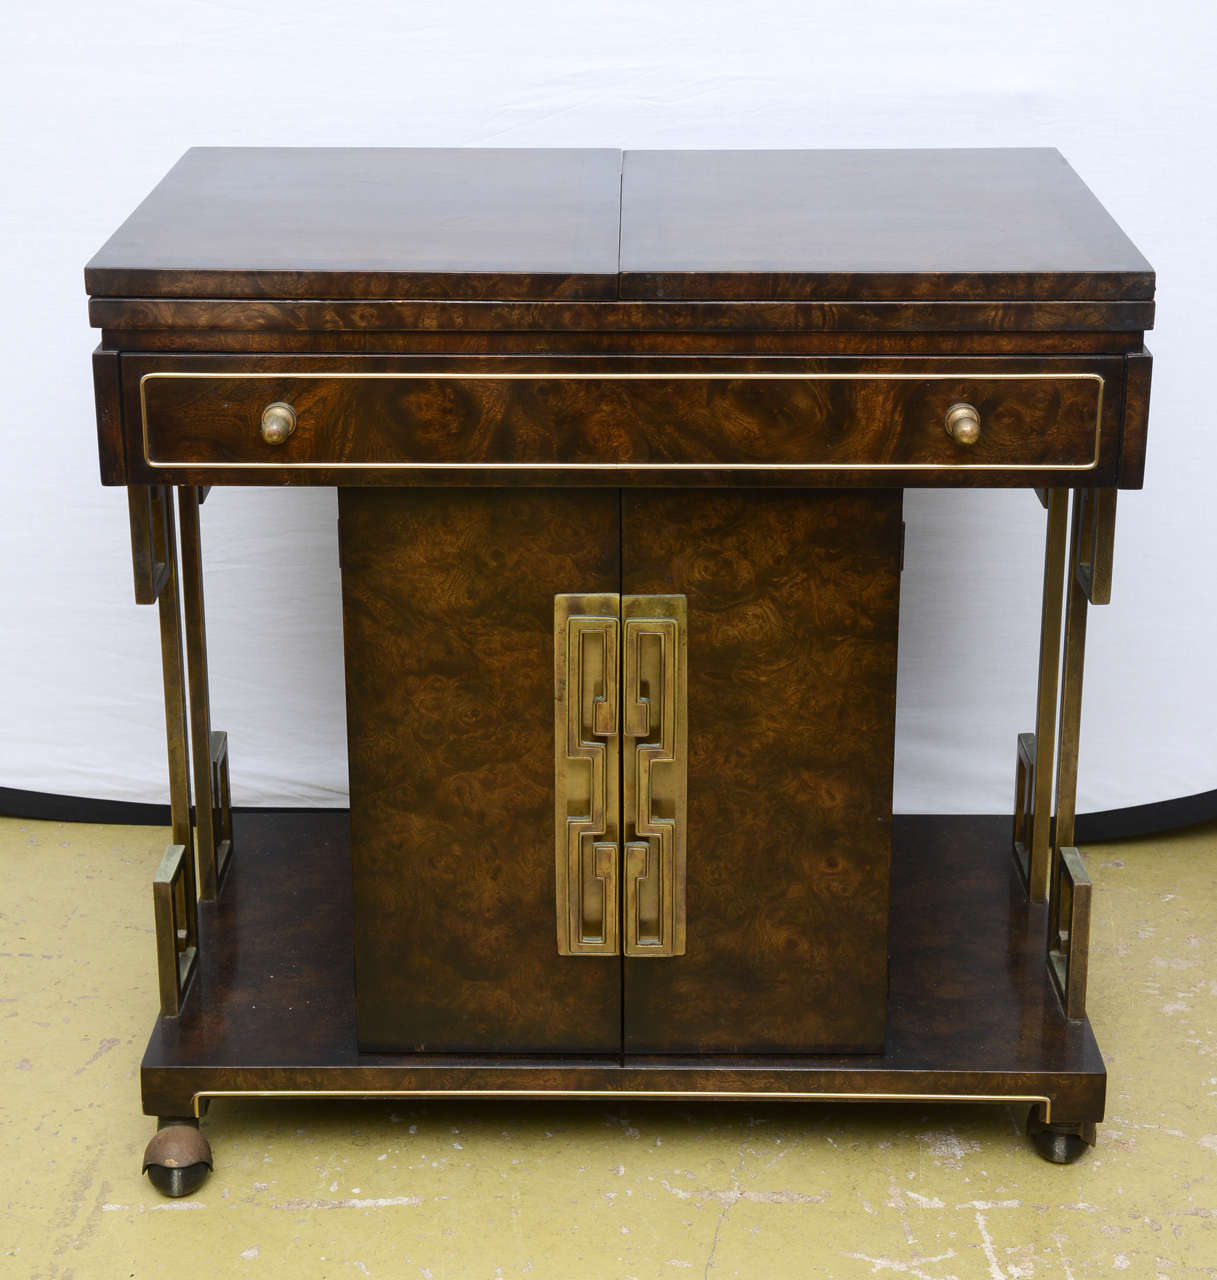 1 drawer teacart with 2 door interior cabinbet, with Brass greek key motif on the sides.  Measures 60